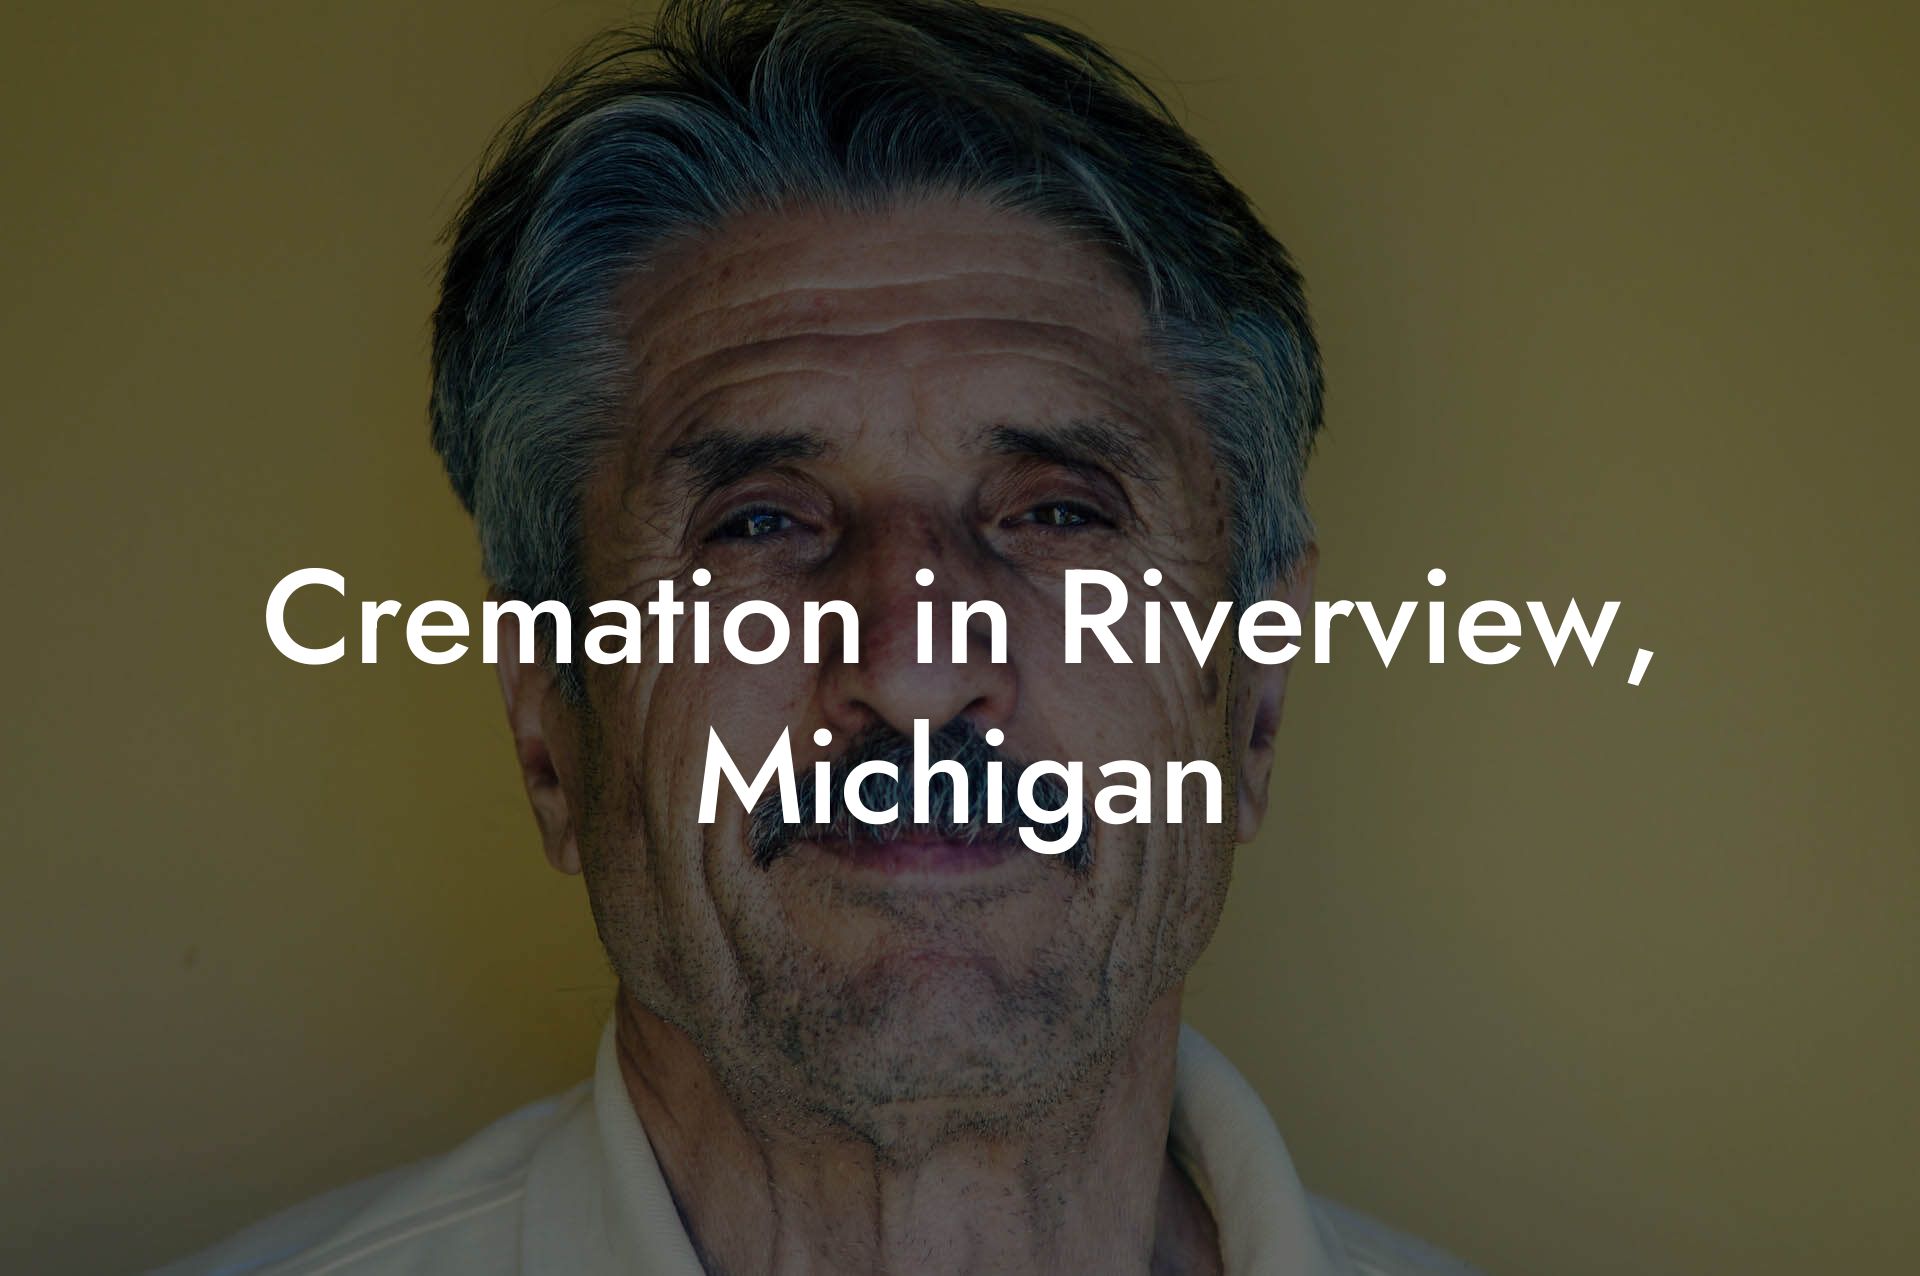 Cremation in Riverview, Michigan